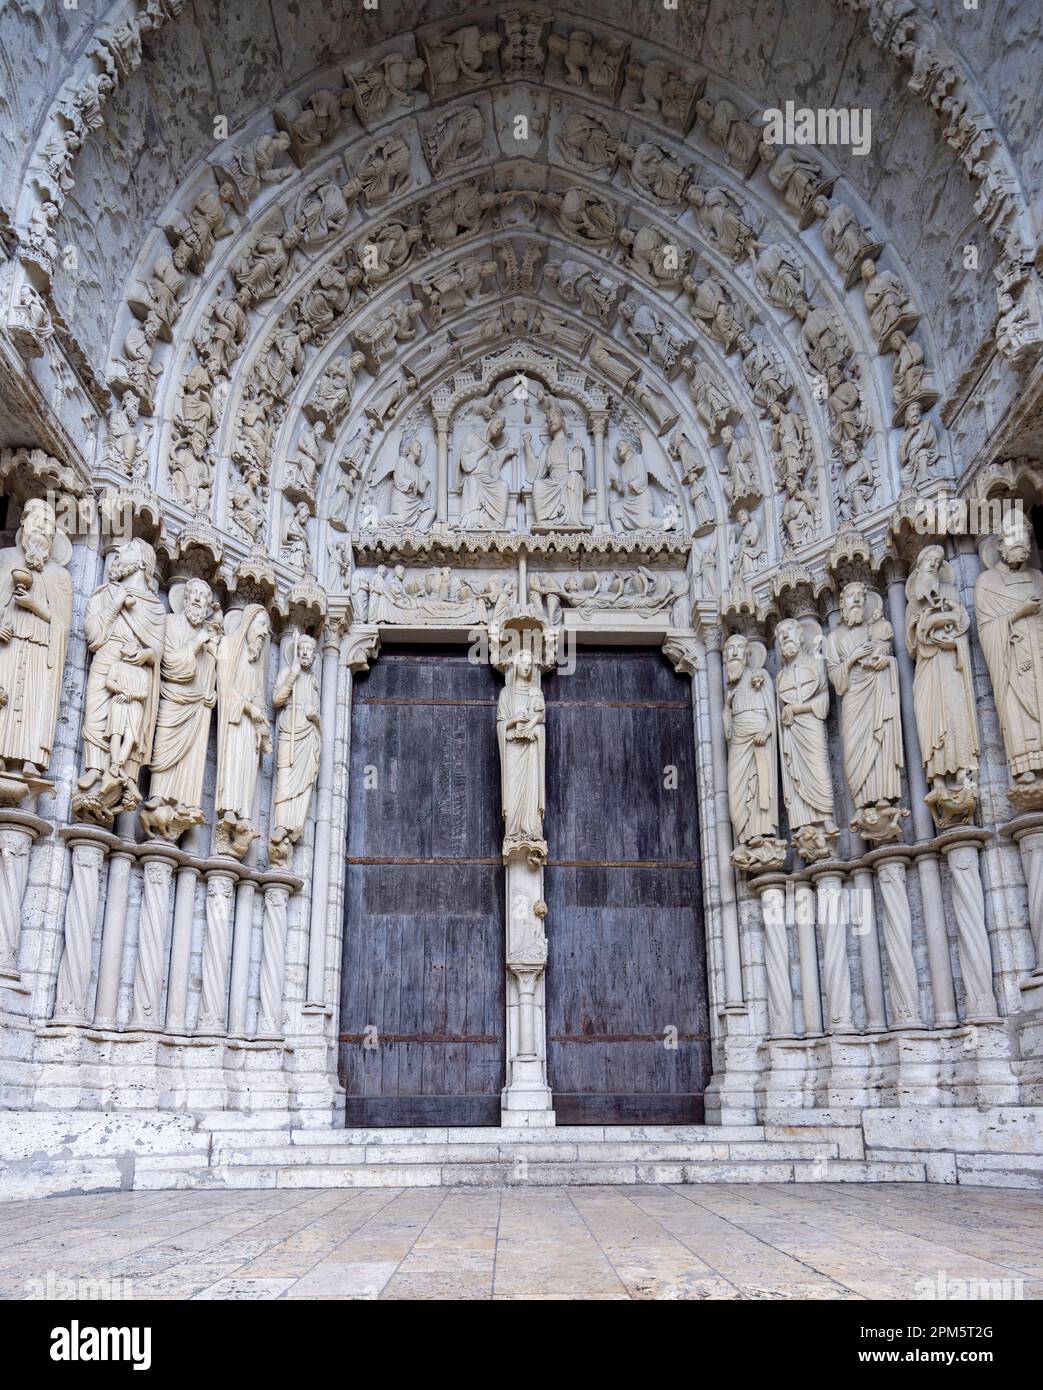 central doorway, north transept portal, Chartres cathedral, France Stock Photo